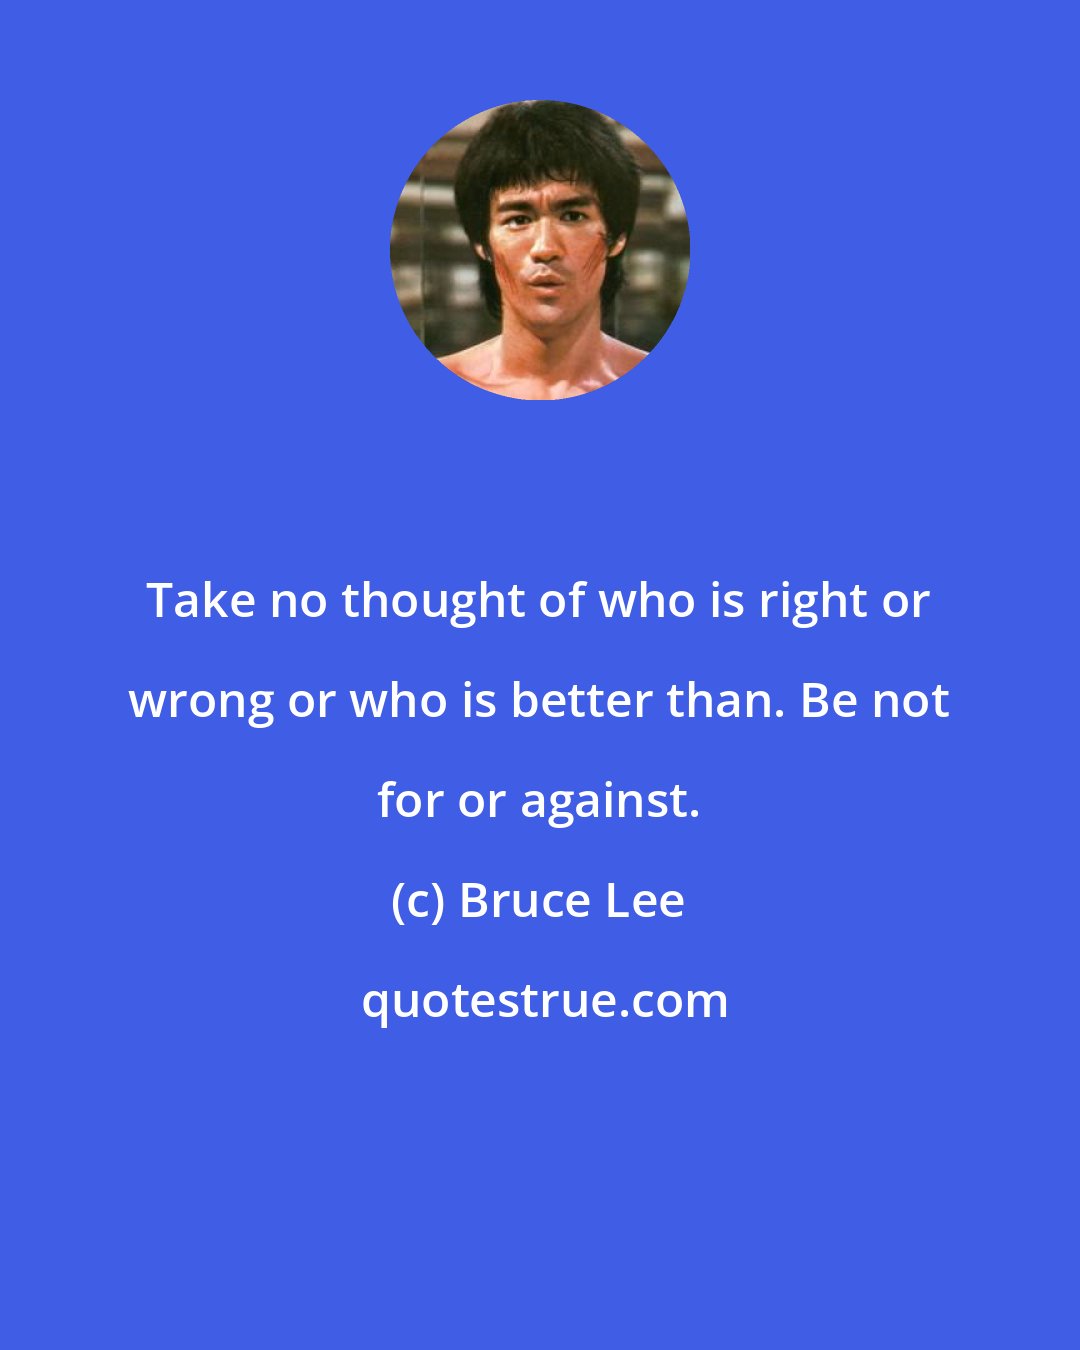 Bruce Lee: Take no thought of who is right or wrong or who is better than. Be not for or against.